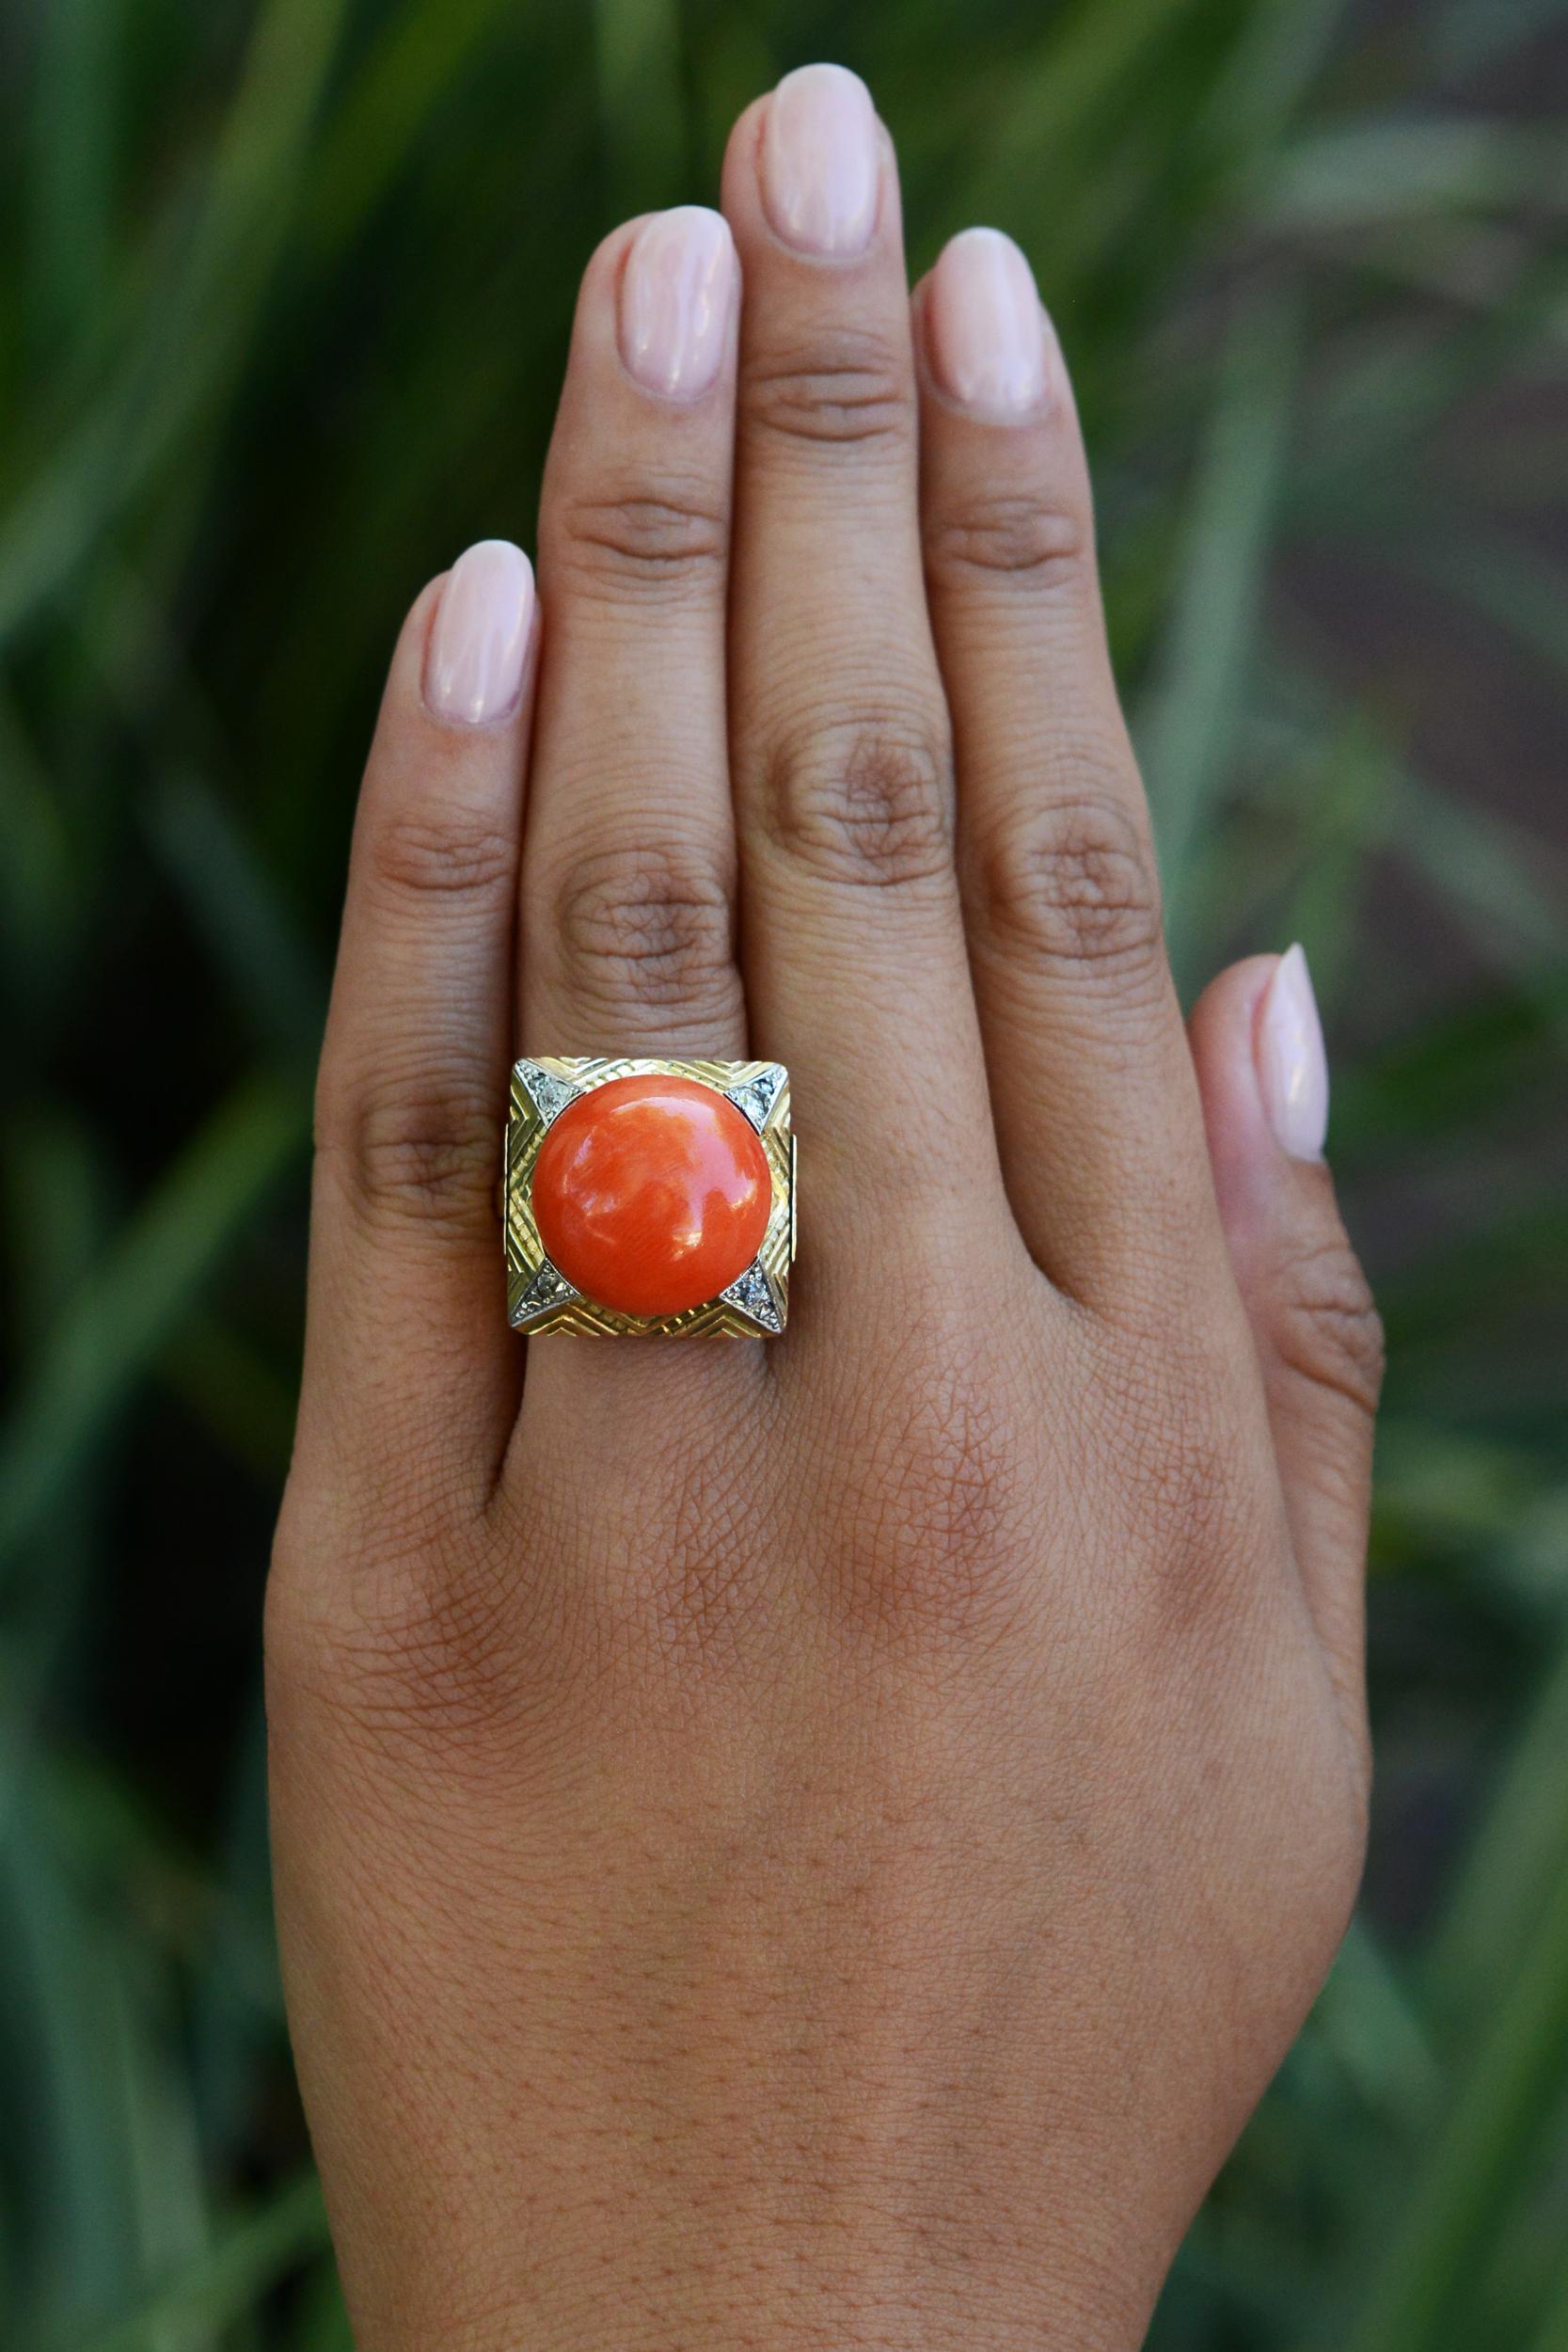 This 1940s vintage late Art Deco-Retro era cocktail ring is a resplendent and glittering jewel. Featuring a large cabochon coral weighing over 20 carats, geometrically accented with sparkling natural diamonds. Natural Coral gemstones are held to the